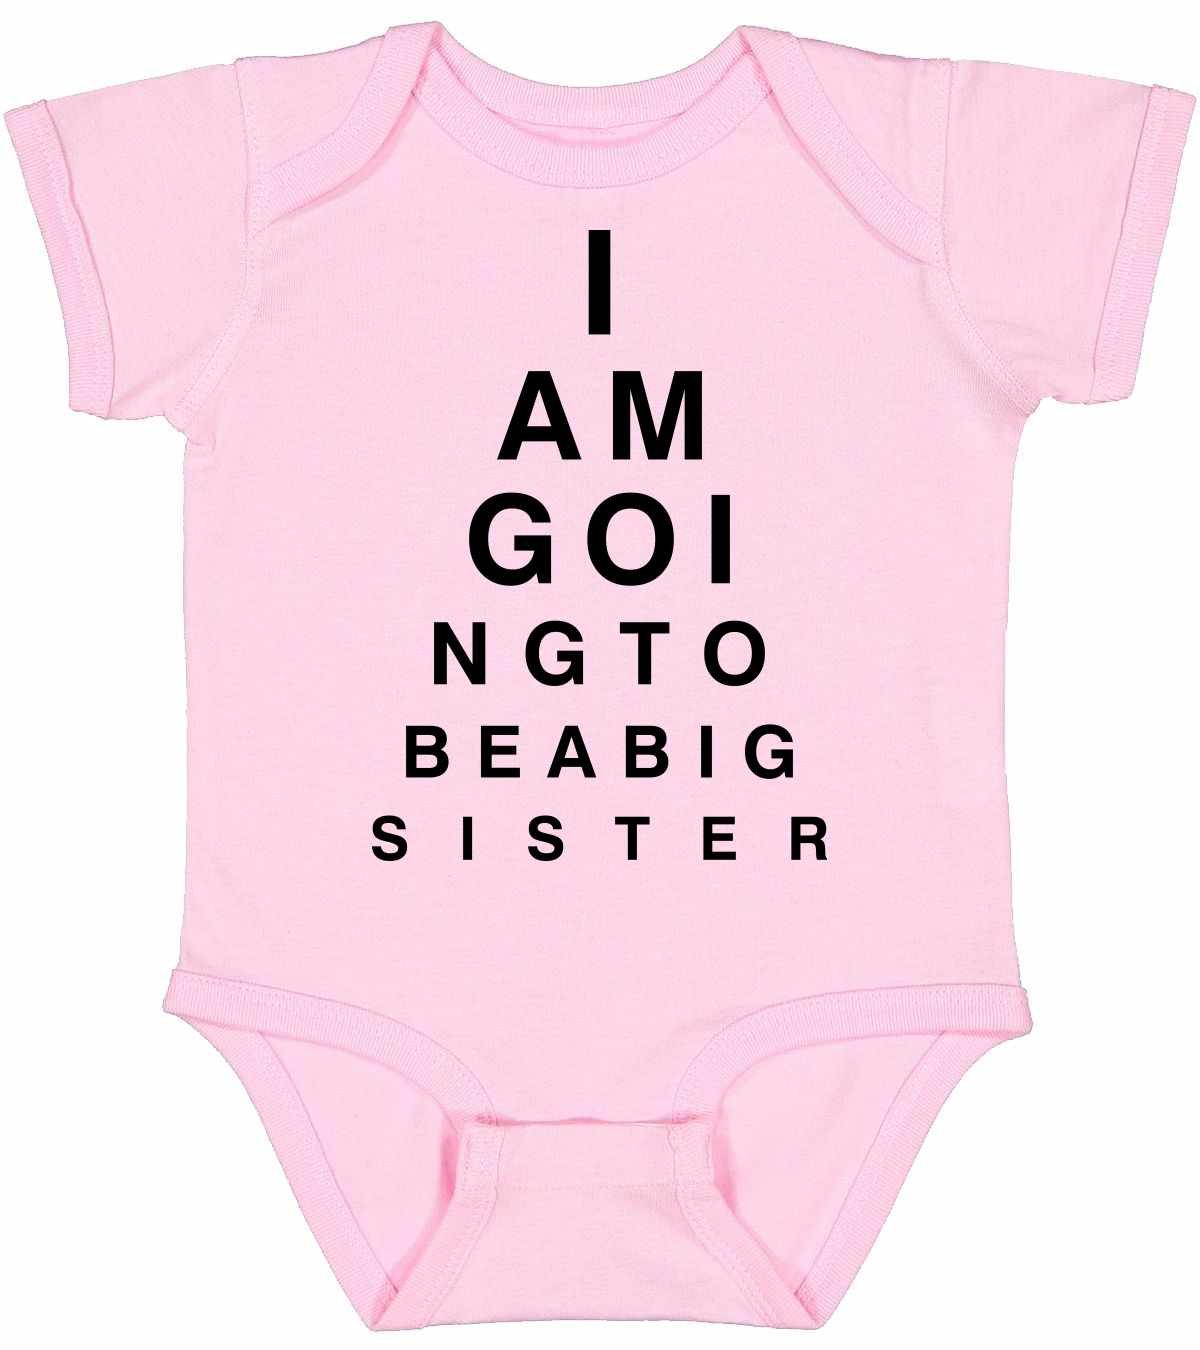 I AM GOING TO BE BIG SISTER EYE CHART Infant BodySuit